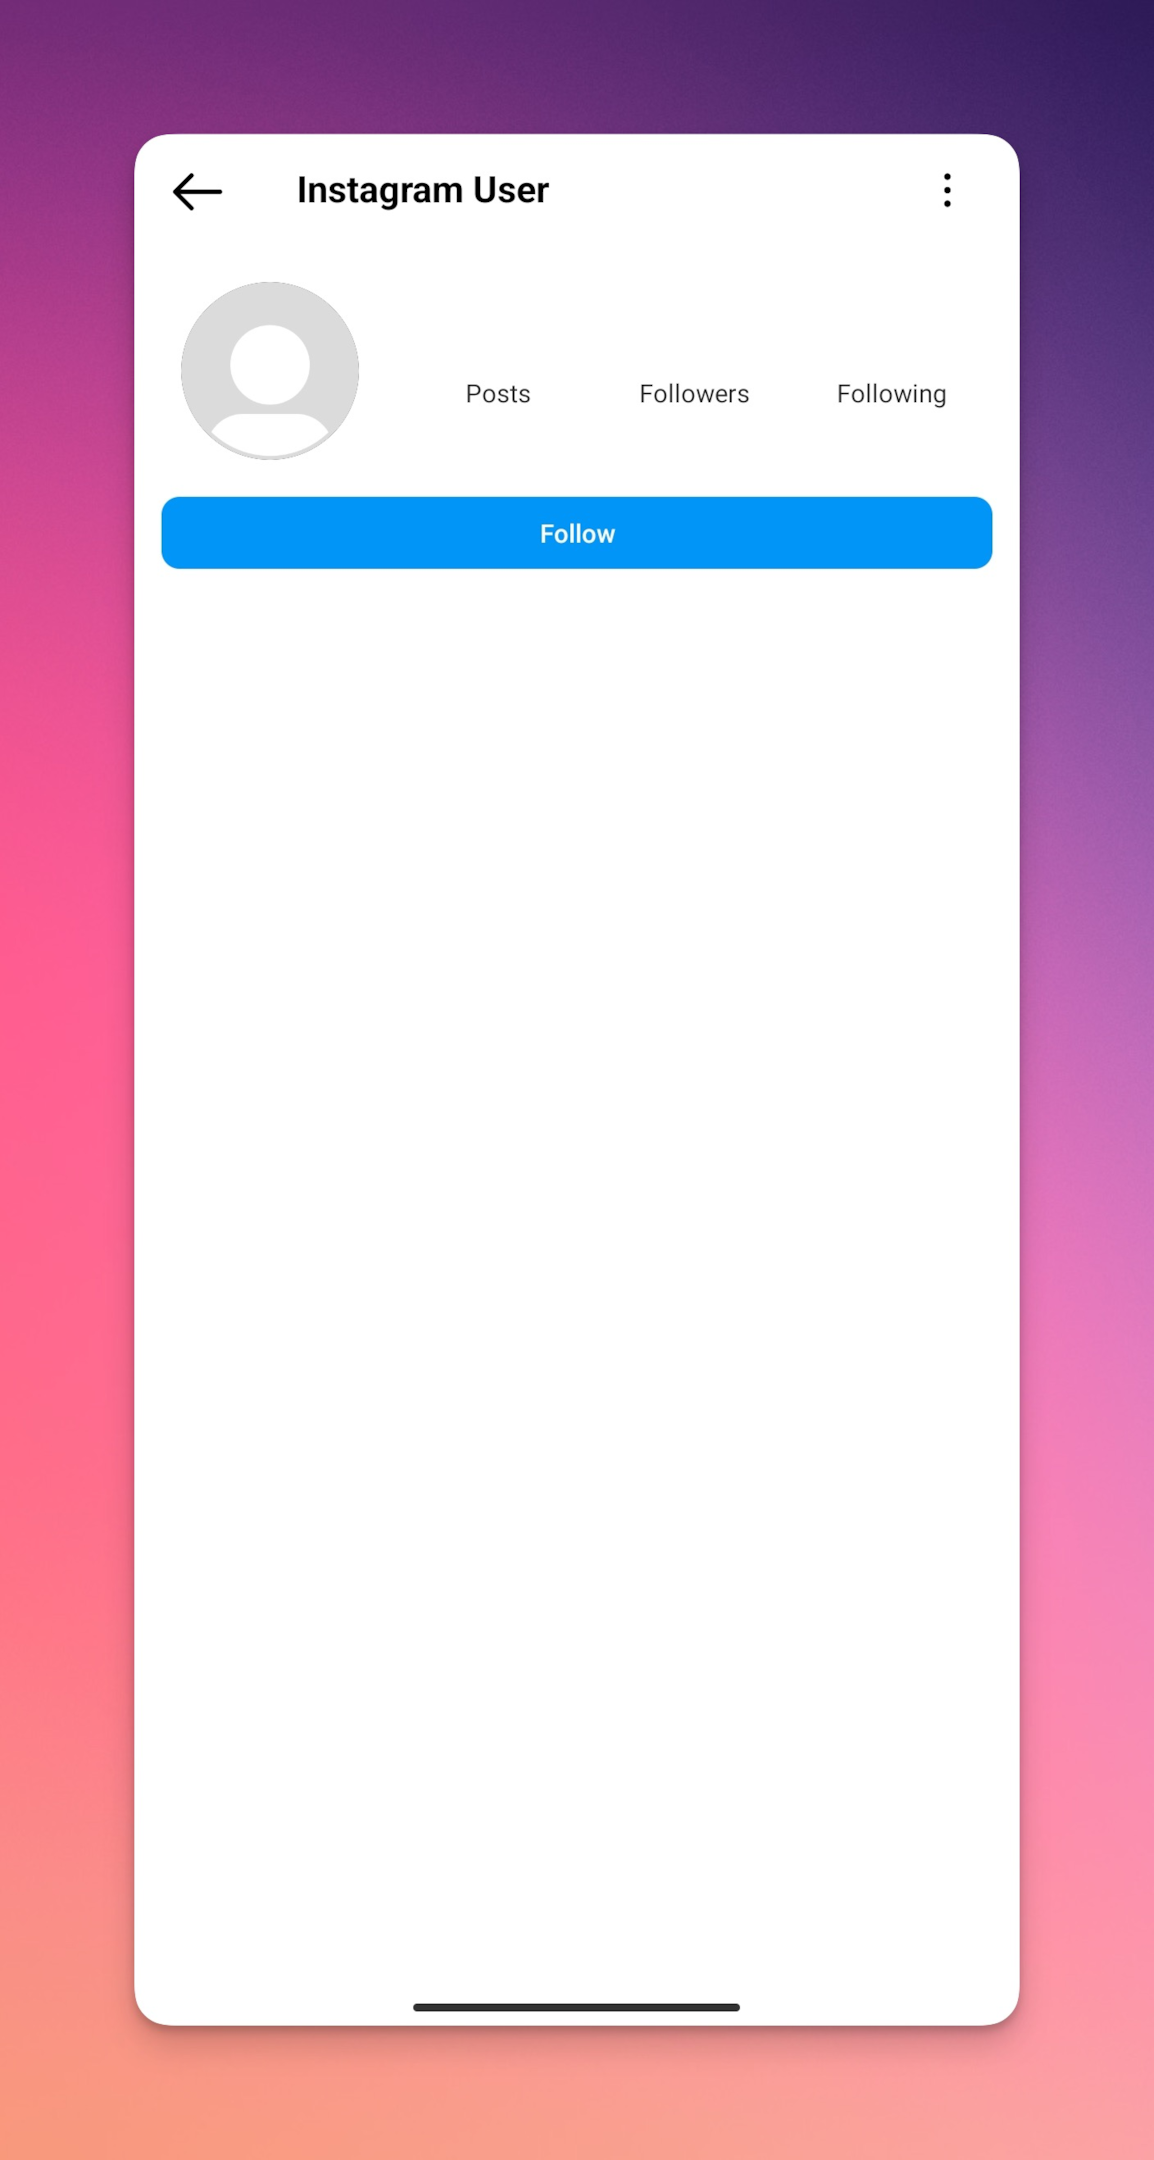 Remote.tools shows a screenshot of a delete Instagram profile